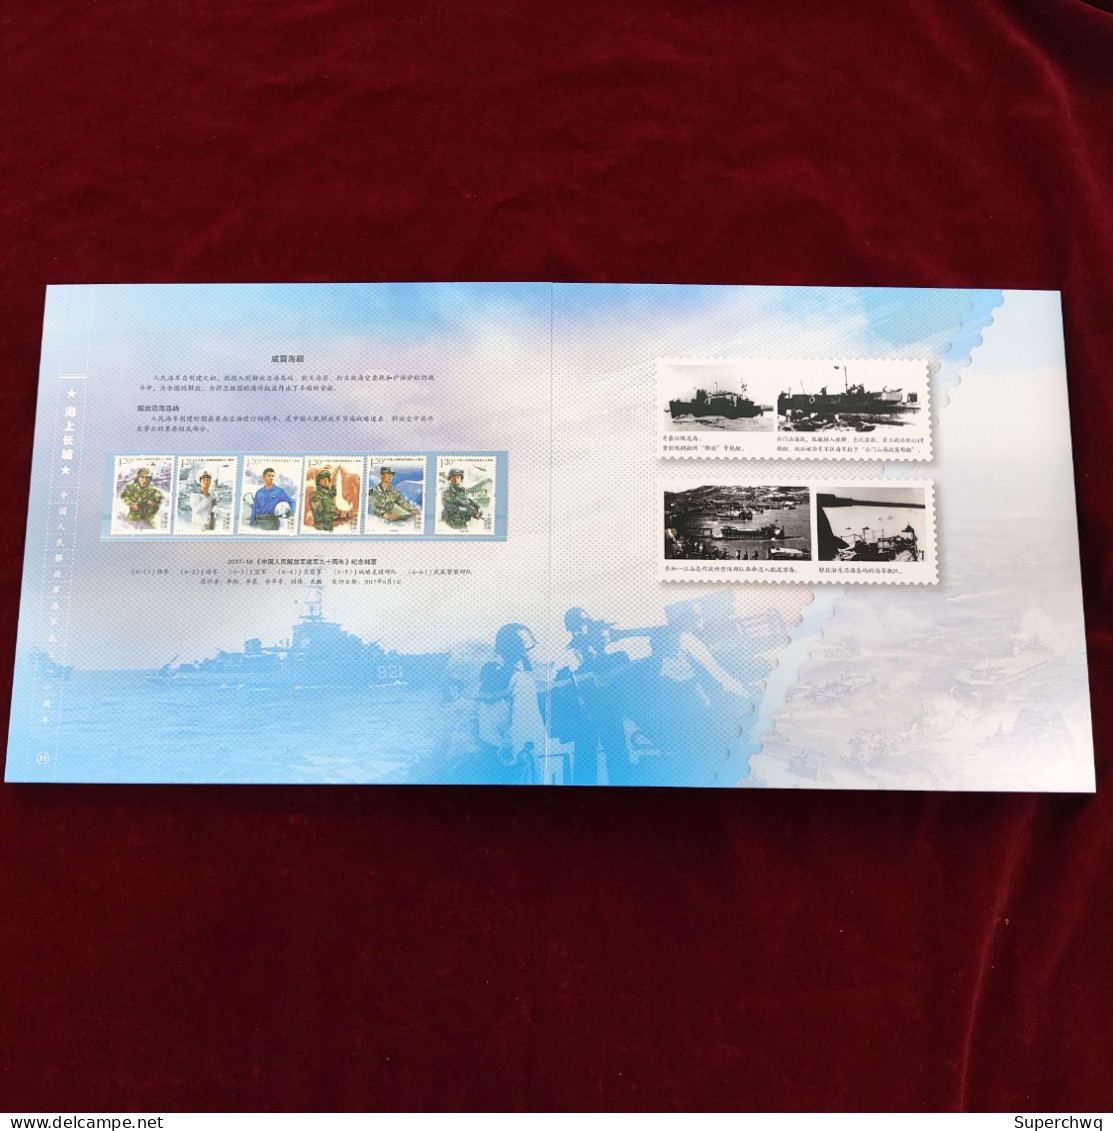 China stamp 2024-3 "The Great Wall at Sea -75th Anniversary of the Founding of the Navy" Commemorative Stamp Collection